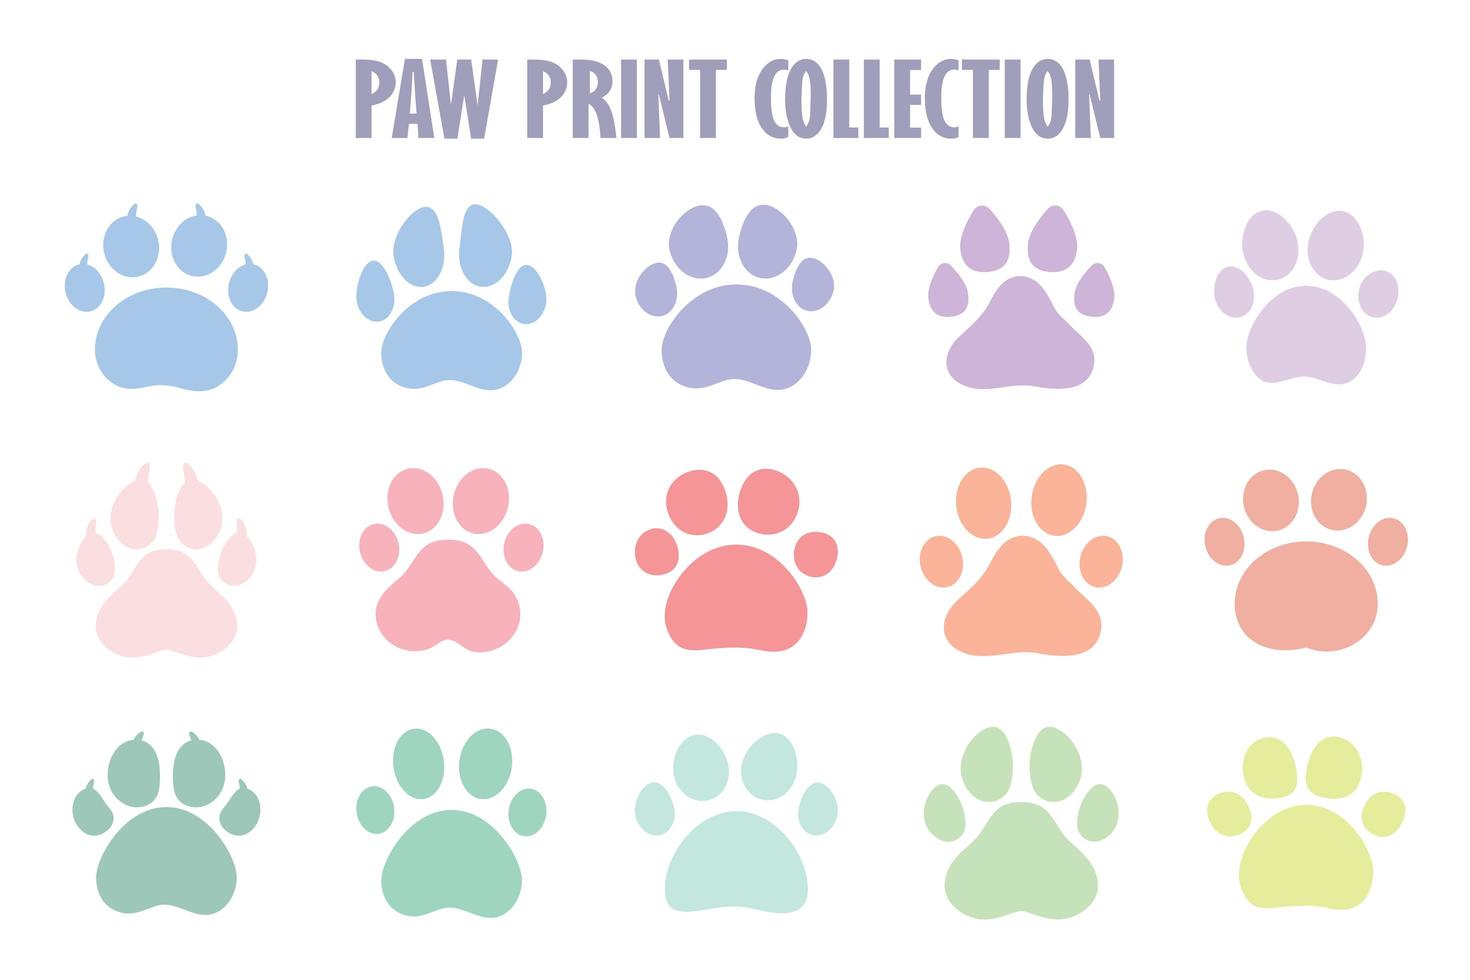 Dog and cat paw prints. A collection of dog footprints with claws. vector illustration.